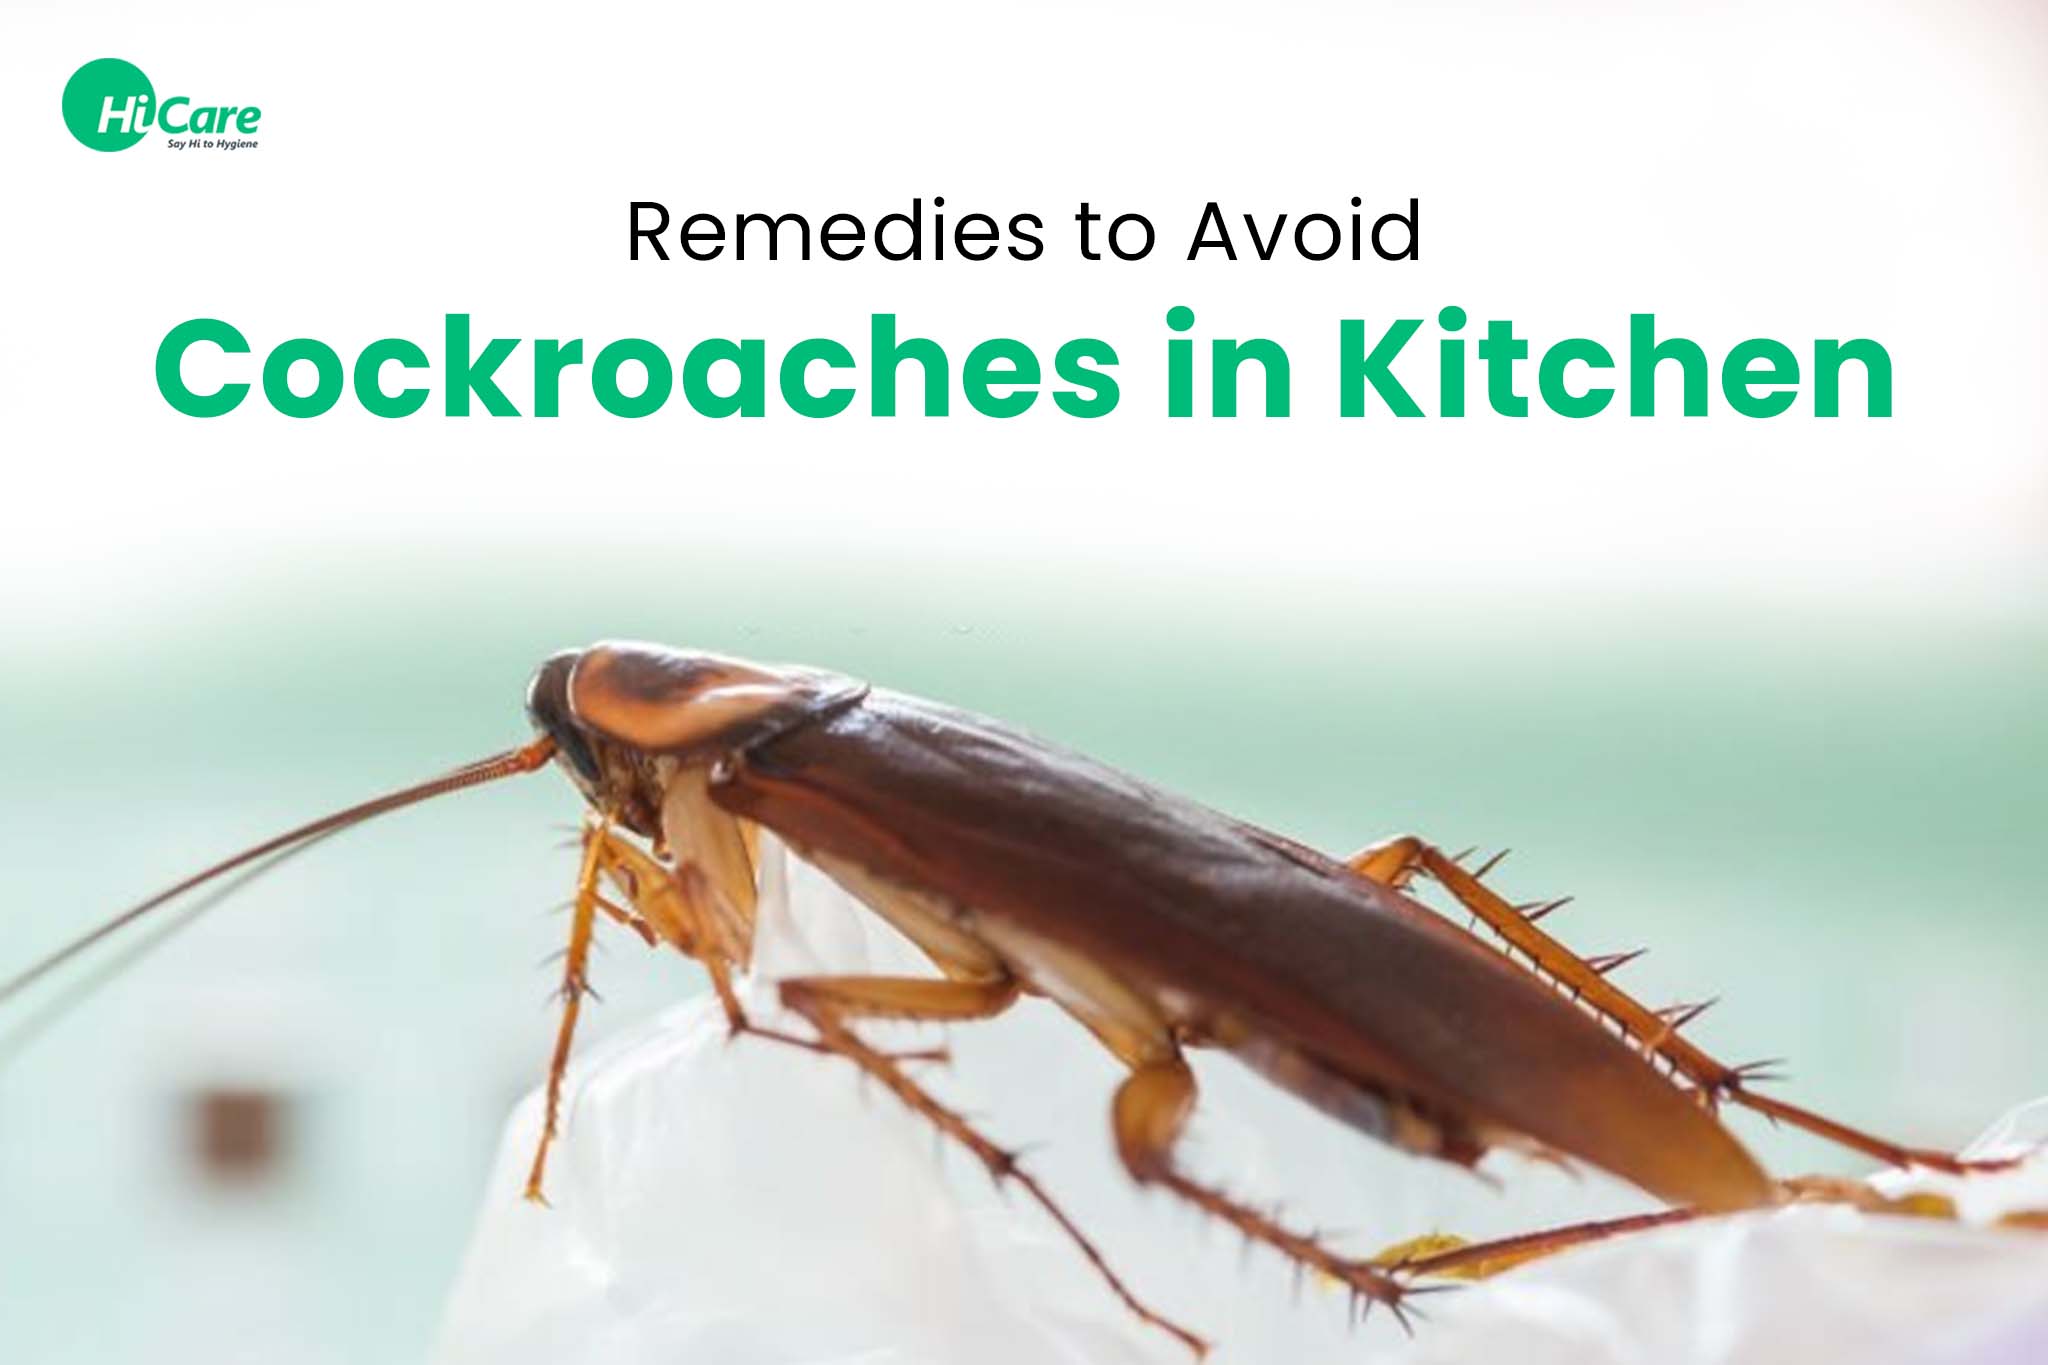 5 Remedies to Avoid Cockroaches in the Kitchen